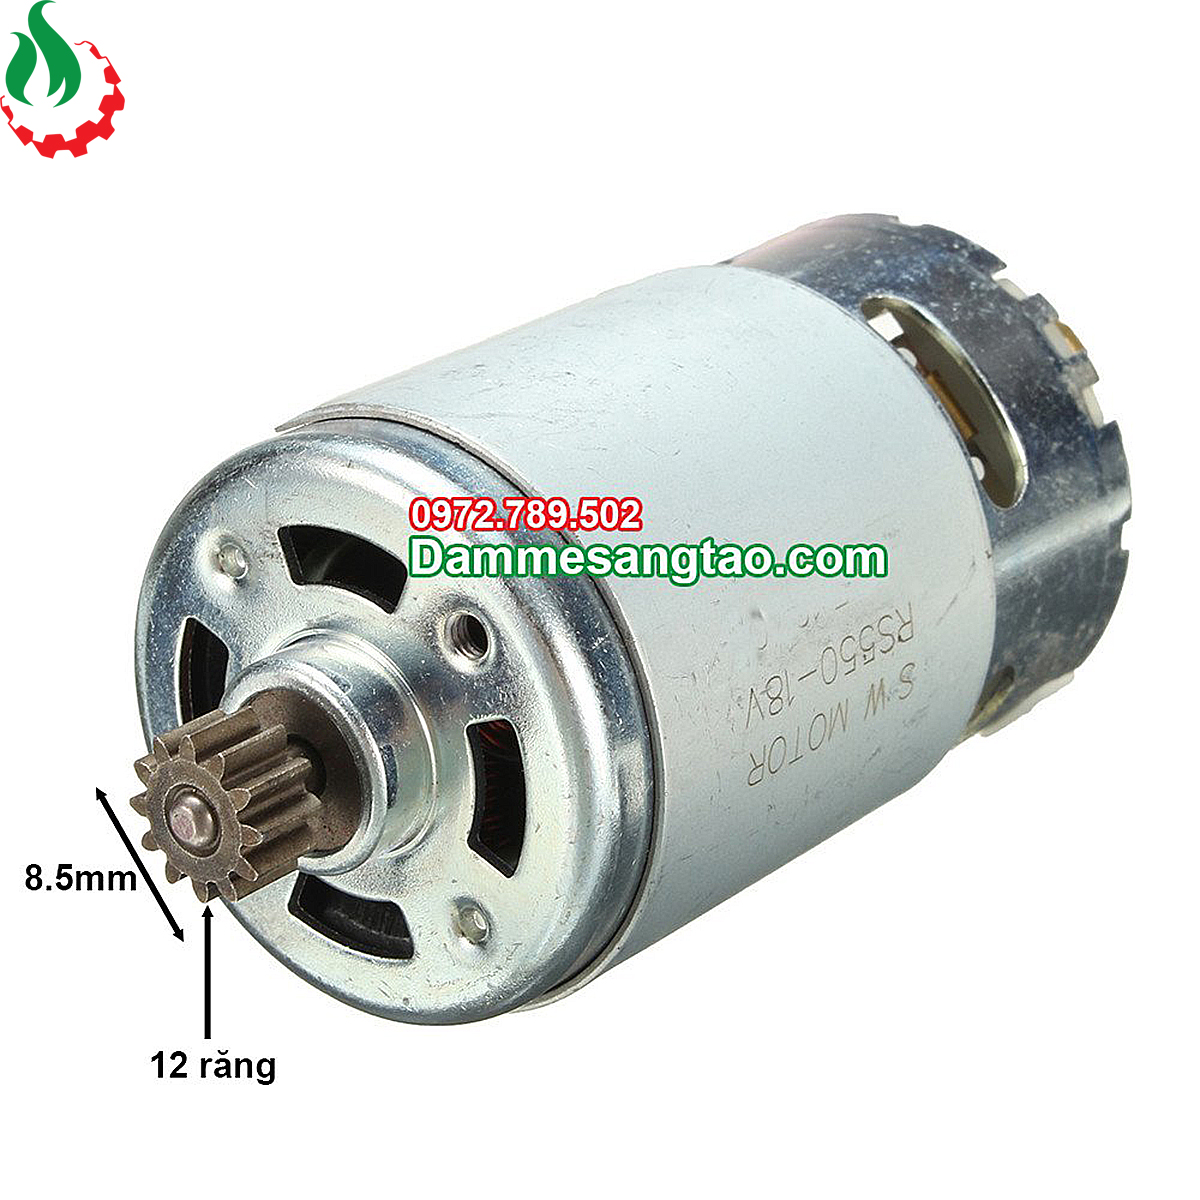 Motor DC RS 550 công suất cao